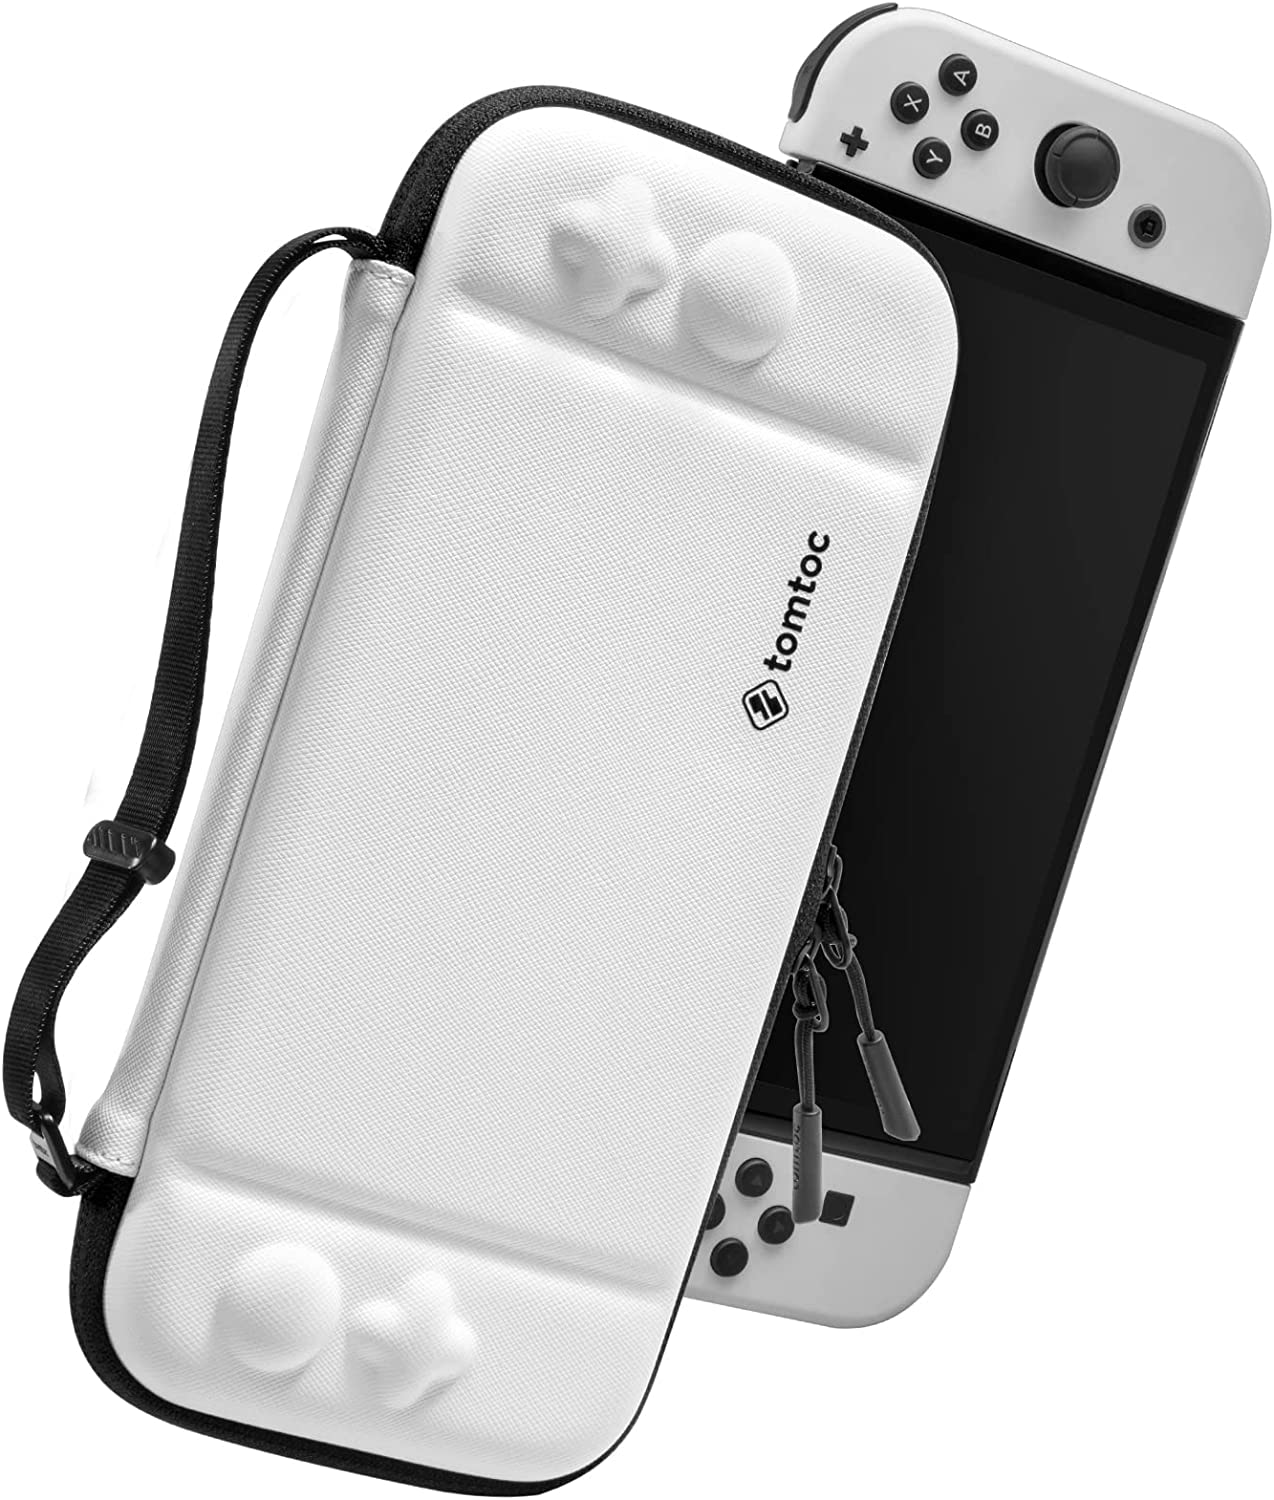 Tomtoc Switch Case for Nintendo Switch-OLED Model Slim Case - White